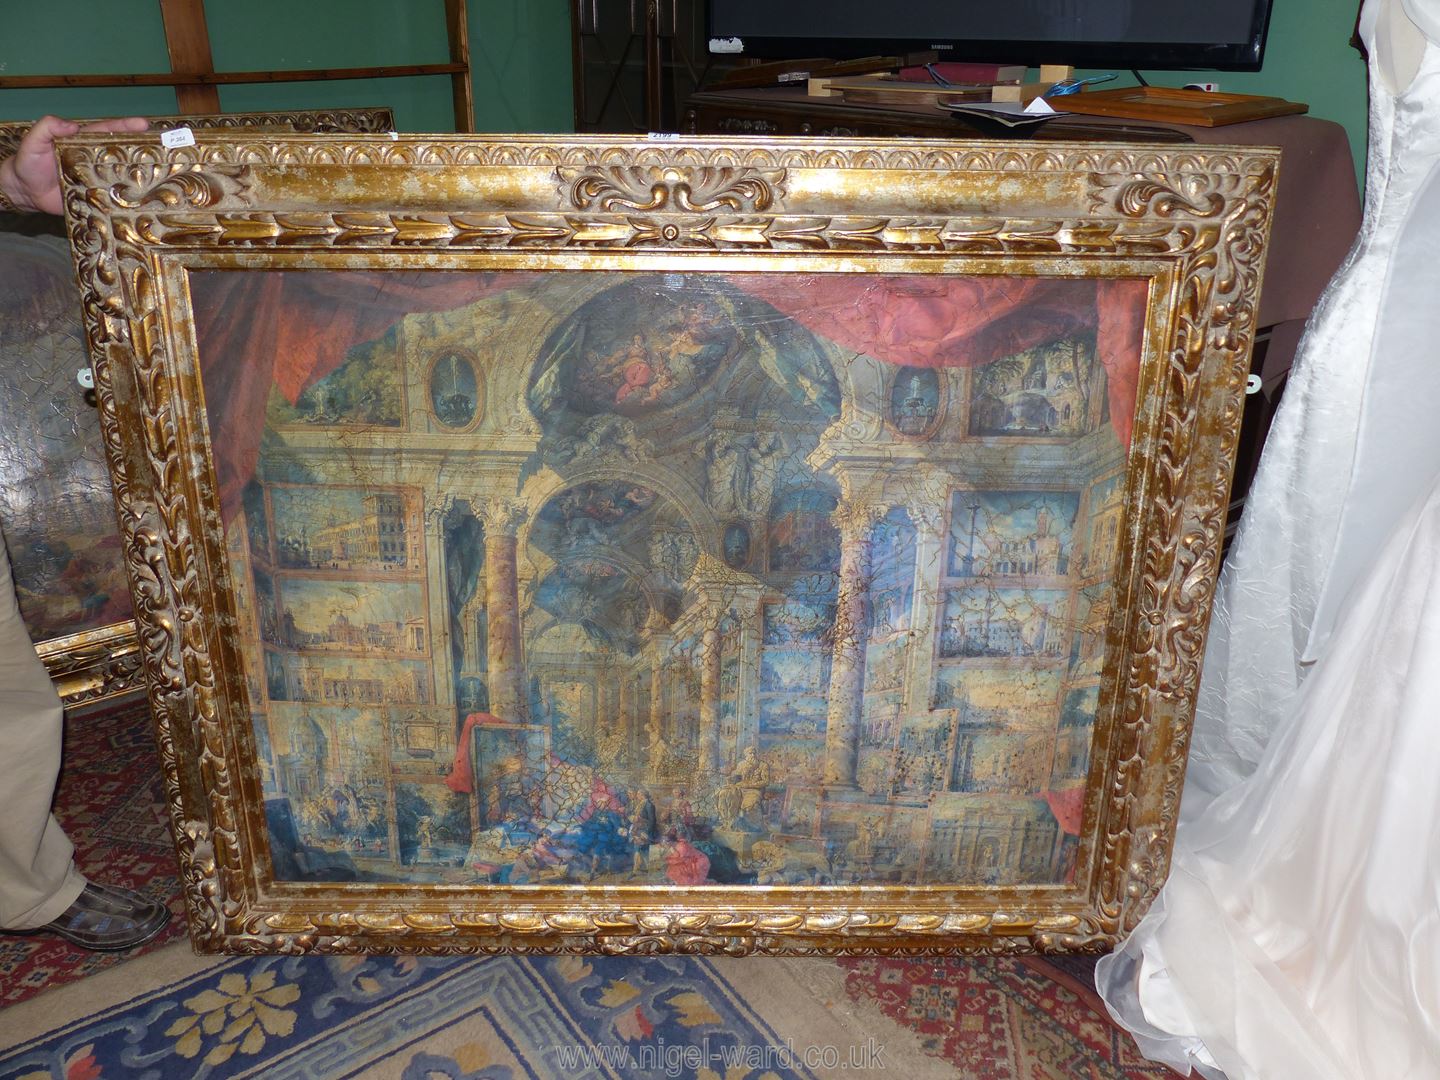 A very large ornate gilt framed Print on board by Giovanni Paola Panini titled 'Modern Rome',